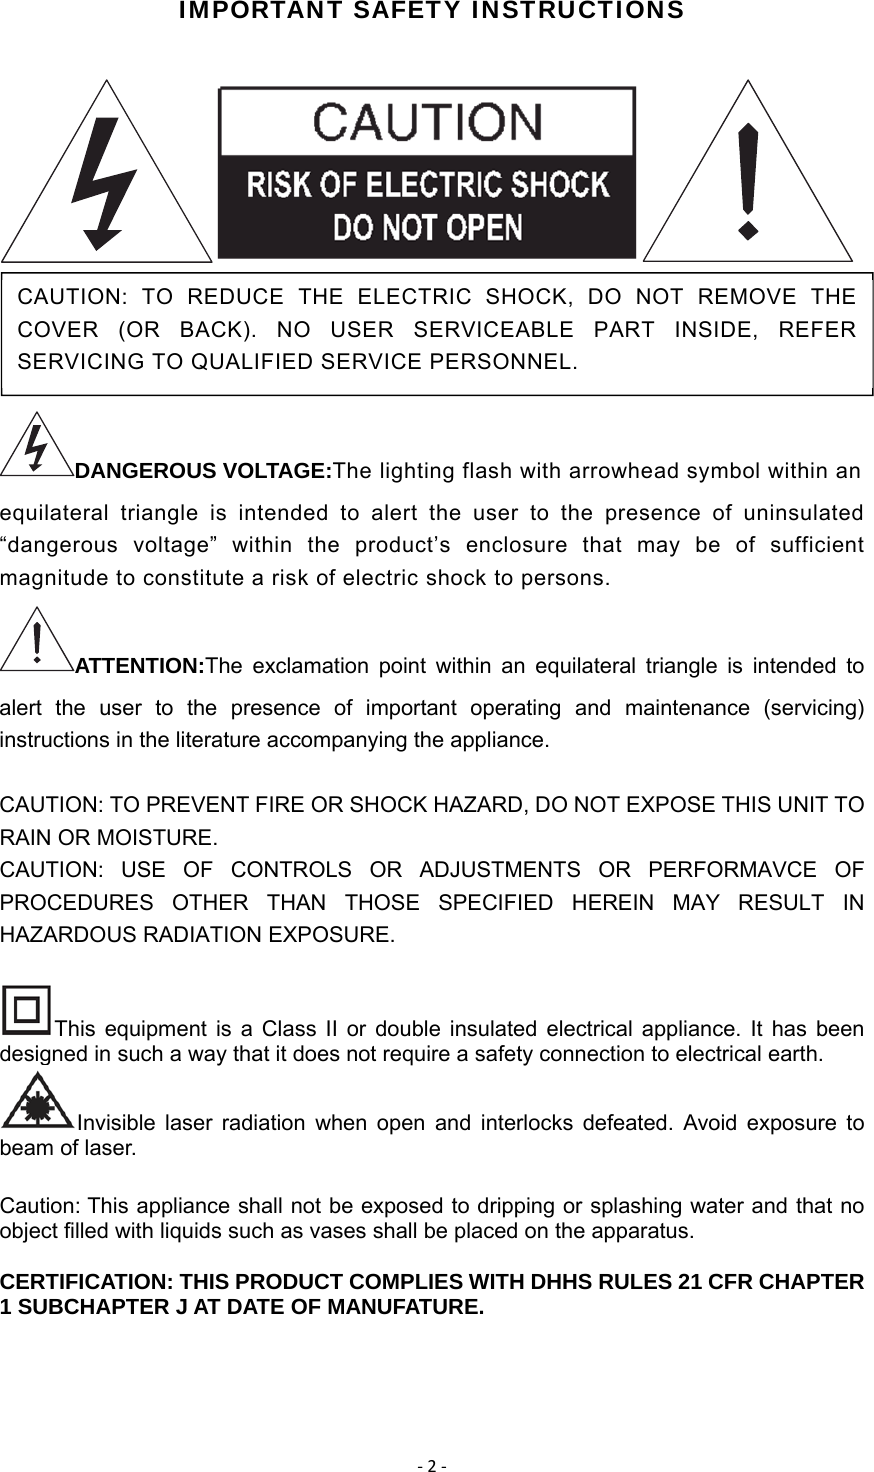 ‐2‐IMPORTANT SAFETY INSTRUCTIONS    DANGEROUS VOLTAGE:The lighting flash with arrowhead symbol within an equilateral triangle is intended to alert the user to the presence of uninsulated “dangerous voltage” within the product’s enclosure that may be of sufficient magnitude to constitute a risk of electric shock to persons.   ATTENTION:The exclamation point within an equilateral triangle is intended to alert the user to the presence of important operating and maintenance (servicing) instructions in the literature accompanying the appliance.   CAUTION: TO PREVENT FIRE OR SHOCK HAZARD, DO NOT EXPOSE THIS UNIT TO RAIN OR MOISTURE. CAUTION: USE OF CONTROLS OR ADJUSTMENTS OR PERFORMAVCE OF PROCEDURES OTHER THAN THOSE SPECIFIED HEREIN MAY RESULT IN HAZARDOUS RADIATION EXPOSURE. This equipment is a Class II or double insulated electrical appliance. It has been designed in such a way that it does not require a safety connection to electrical earth. Invisible laser radiation when open and interlocks defeated. Avoid exposure to beam of laser. Caution: This appliance shall not be exposed to dripping or splashing water and that no object filled with liquids such as vases shall be placed on the apparatus. CERTIFICATION: THIS PRODUCT COMPLIES WITH DHHS RULES 21 CFR CHAPTER 1 SUBCHAPTER J AT DATE OF MANUFATURE. CAUTION: TO REDUCE THE ELECTRIC SHOCK, DO NOT REMOVE THE COVER (OR BACK). NO USER SERVICEABLE PART INSIDE, REFER SERVICING TO QUALIFIED SERVICE PERSONNEL.